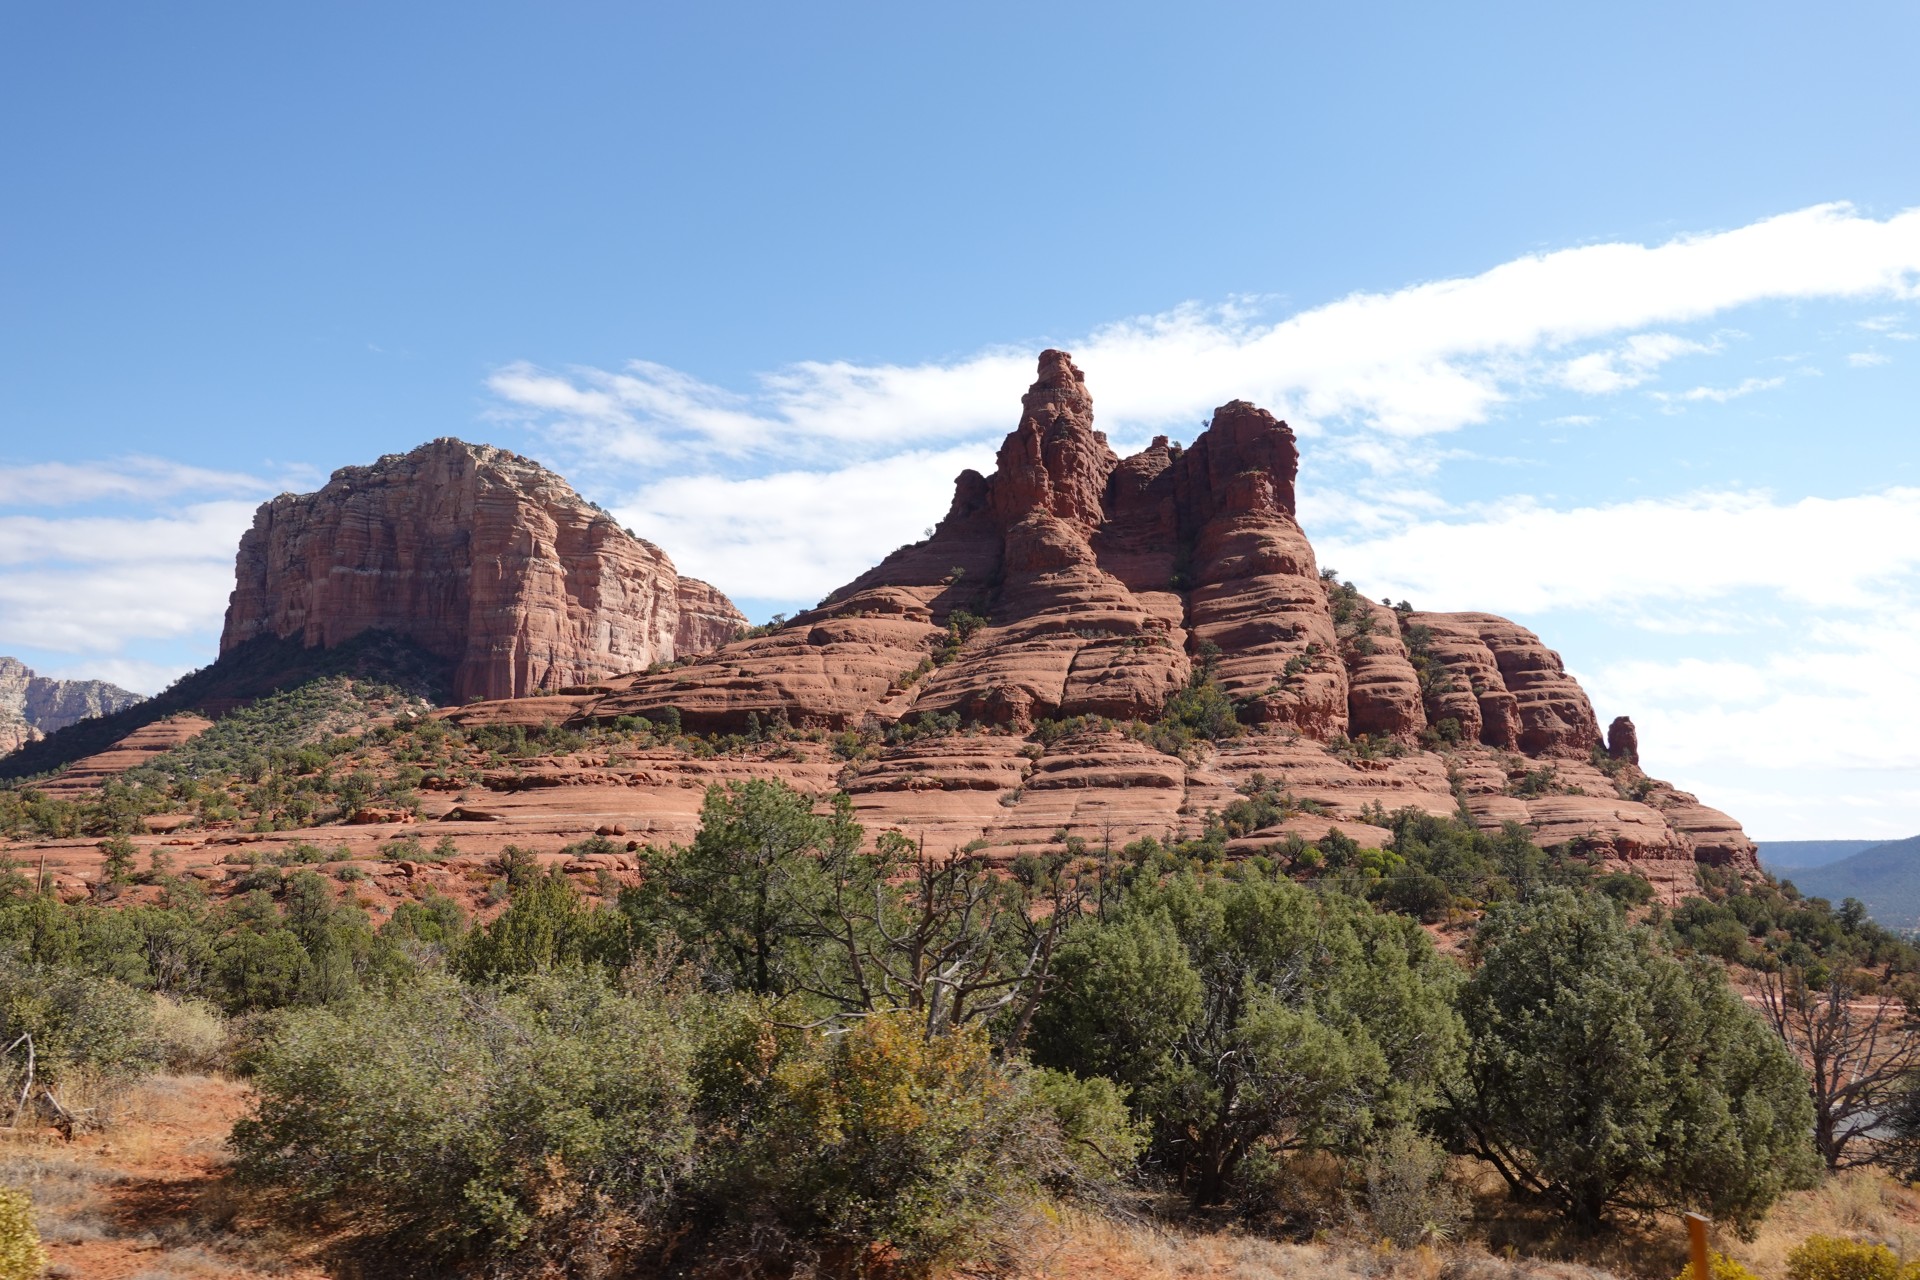 We can't leave Sedona without a shot of the Bell Rock!